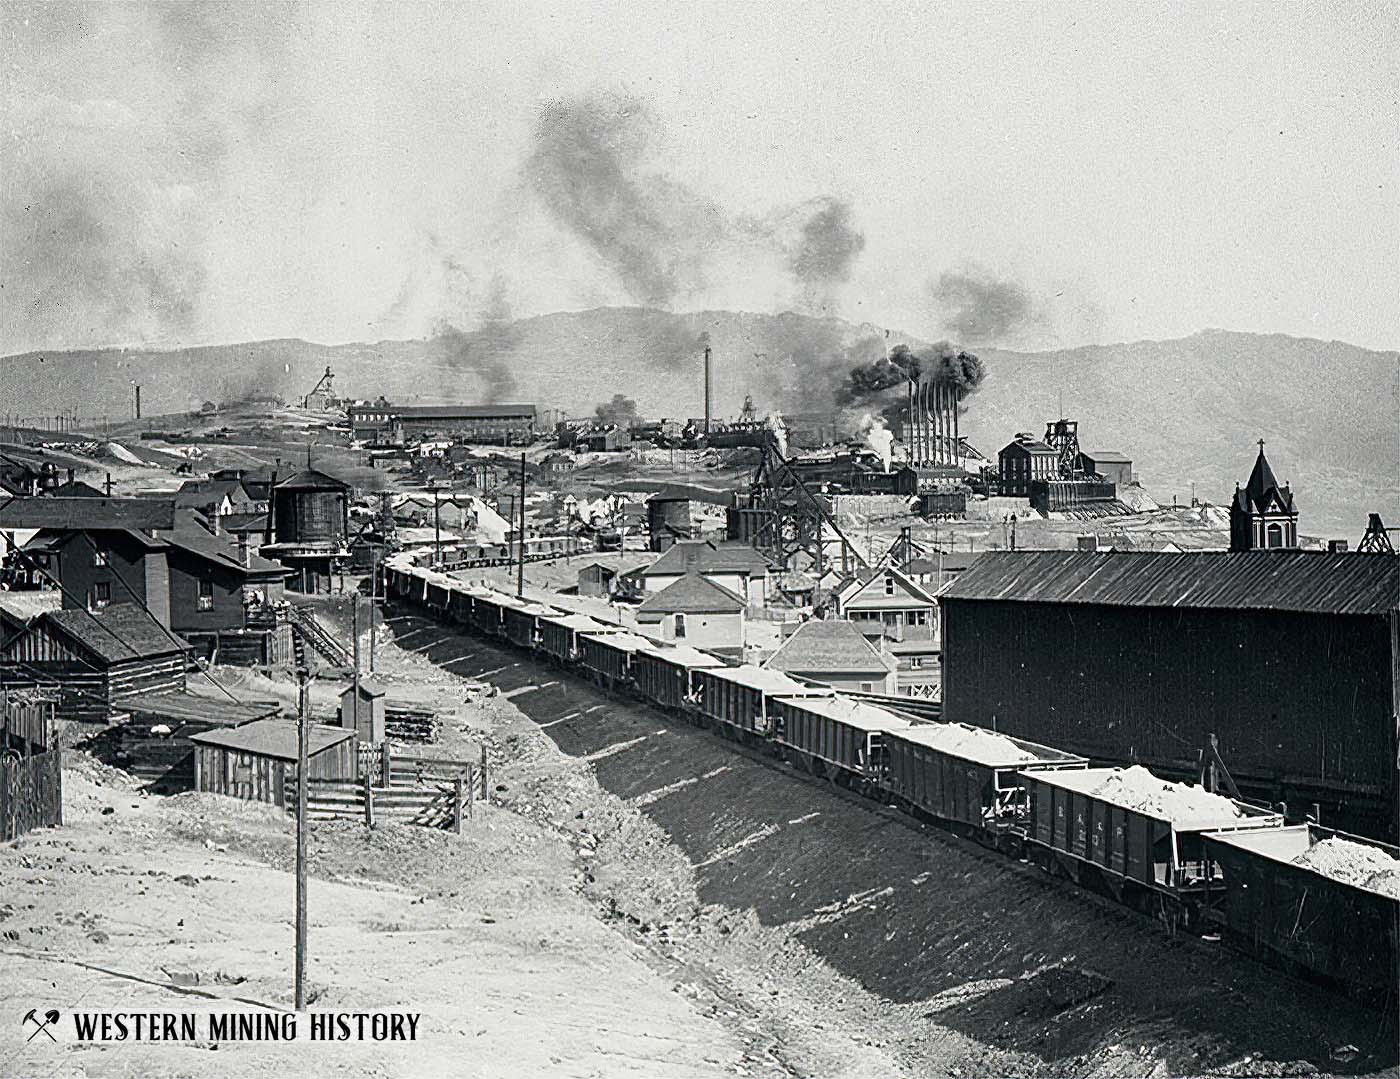 Train hauling ore from Butte to the Washoe Smelter at Anaconda